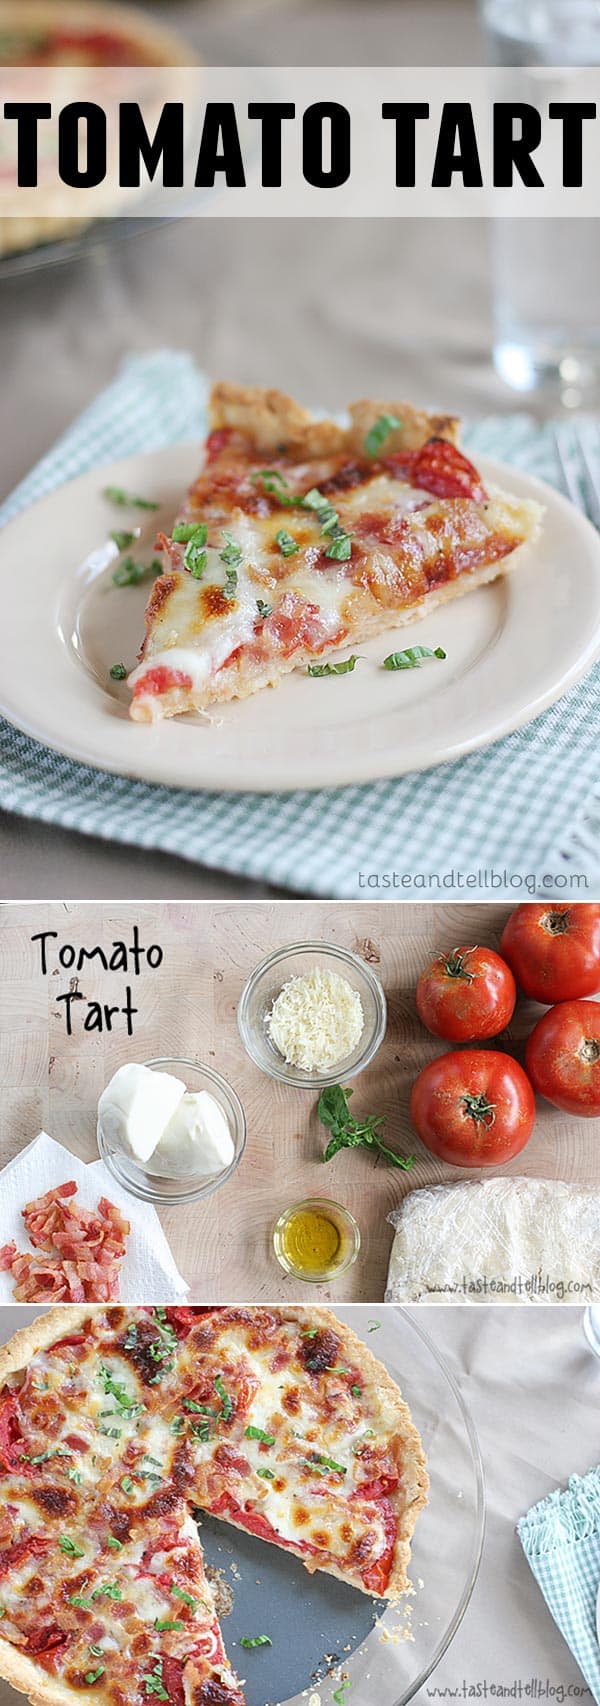 A buttery, flaky crust is filled with fresh tomatoes, bacon and lots of cheese for the perfect end of summer Tomato Tart Recipe.